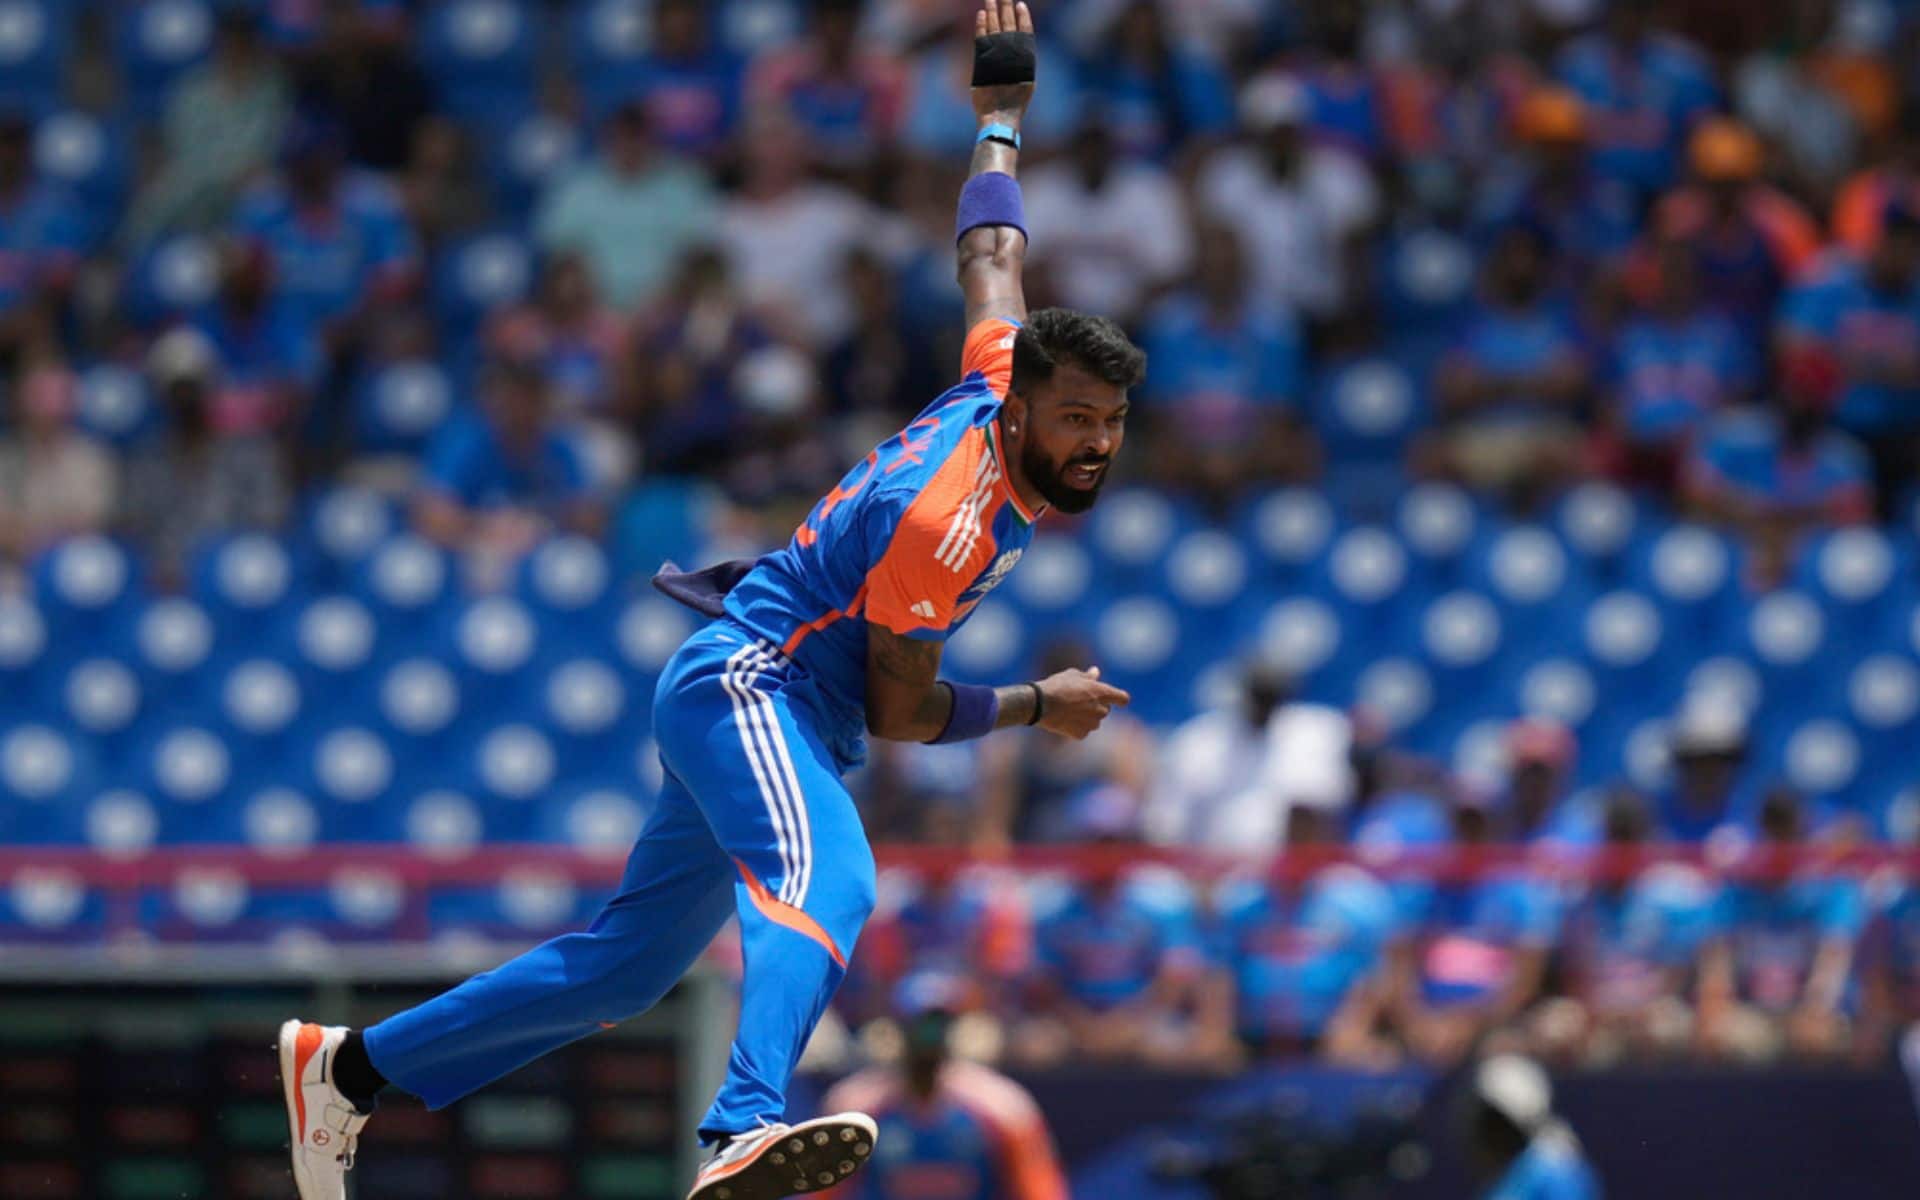 Hardik Pandya's all-round skill will be crucial for India in the match [AP Photos]